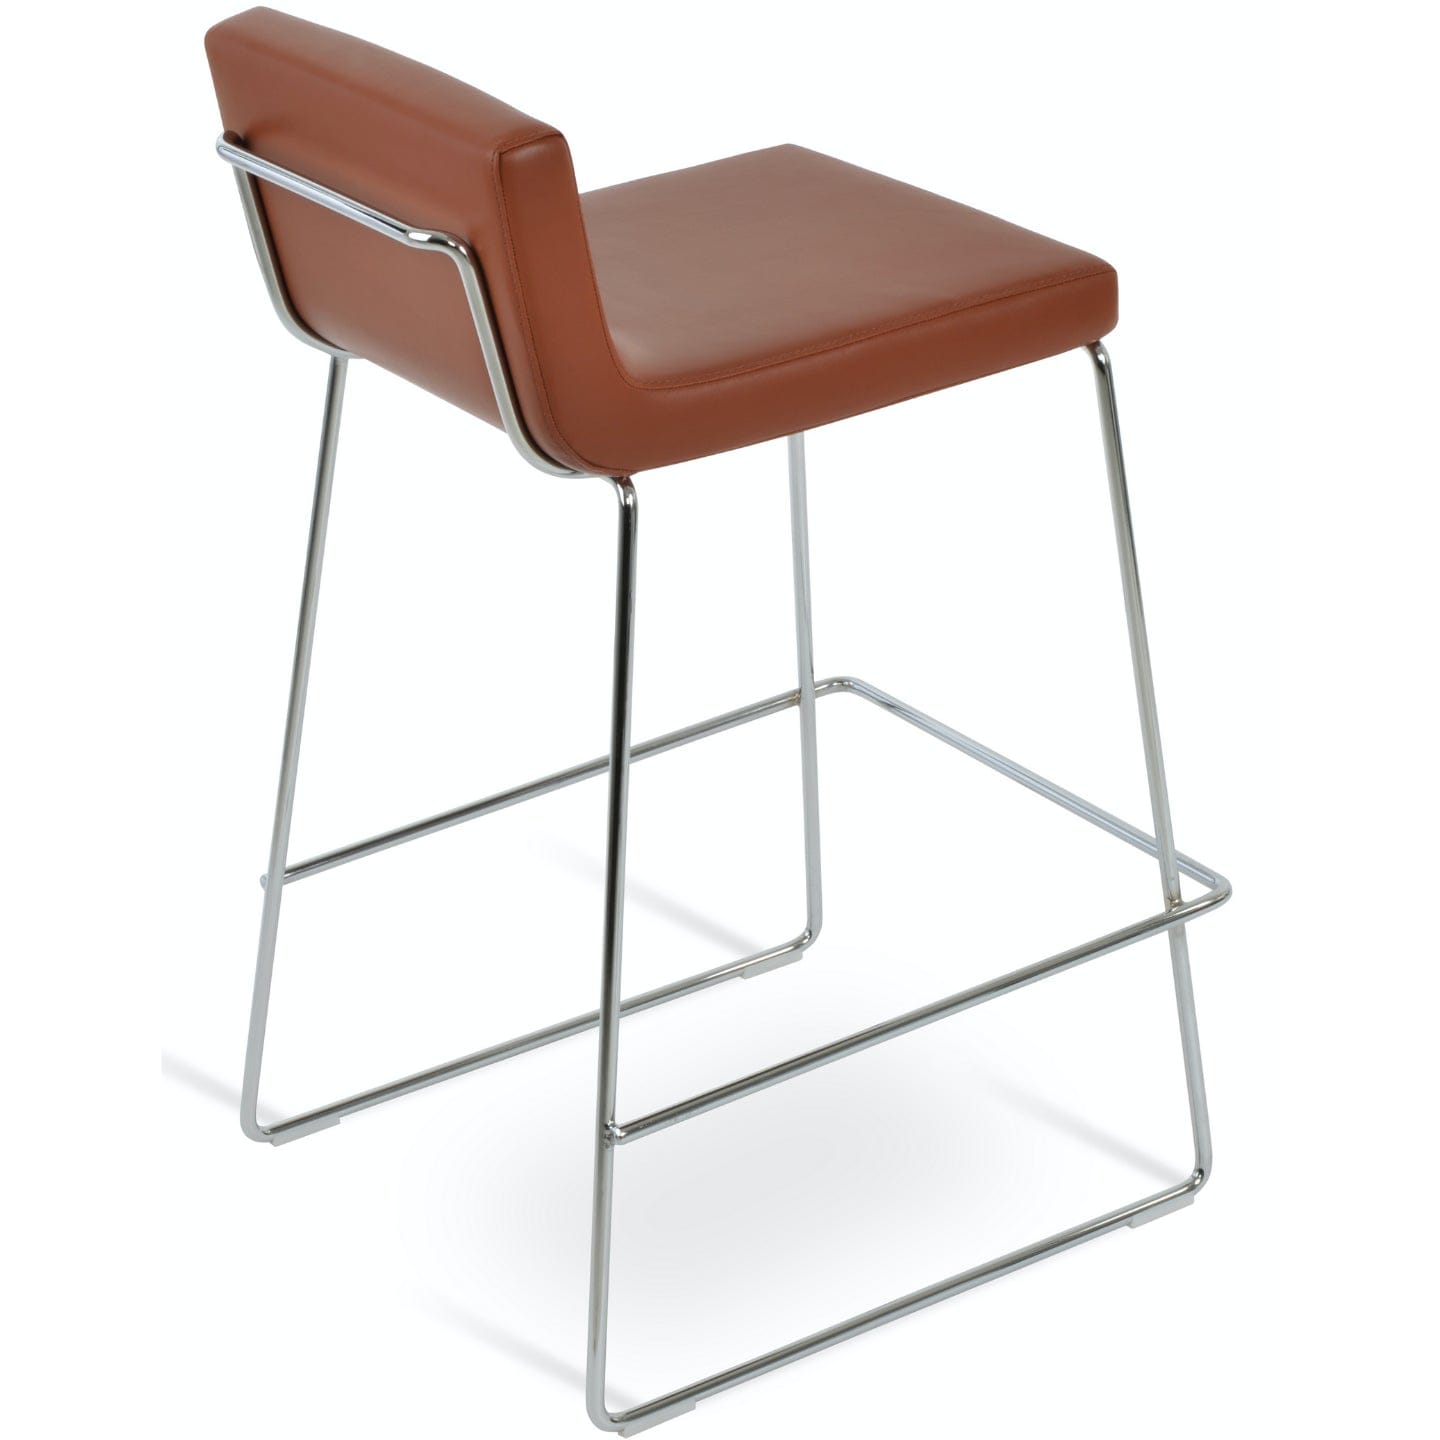 Soho Concept dallas-wire-handle-back-metal-wire-base-faux-leather-seat-kitchen-stool-in-cinnamon